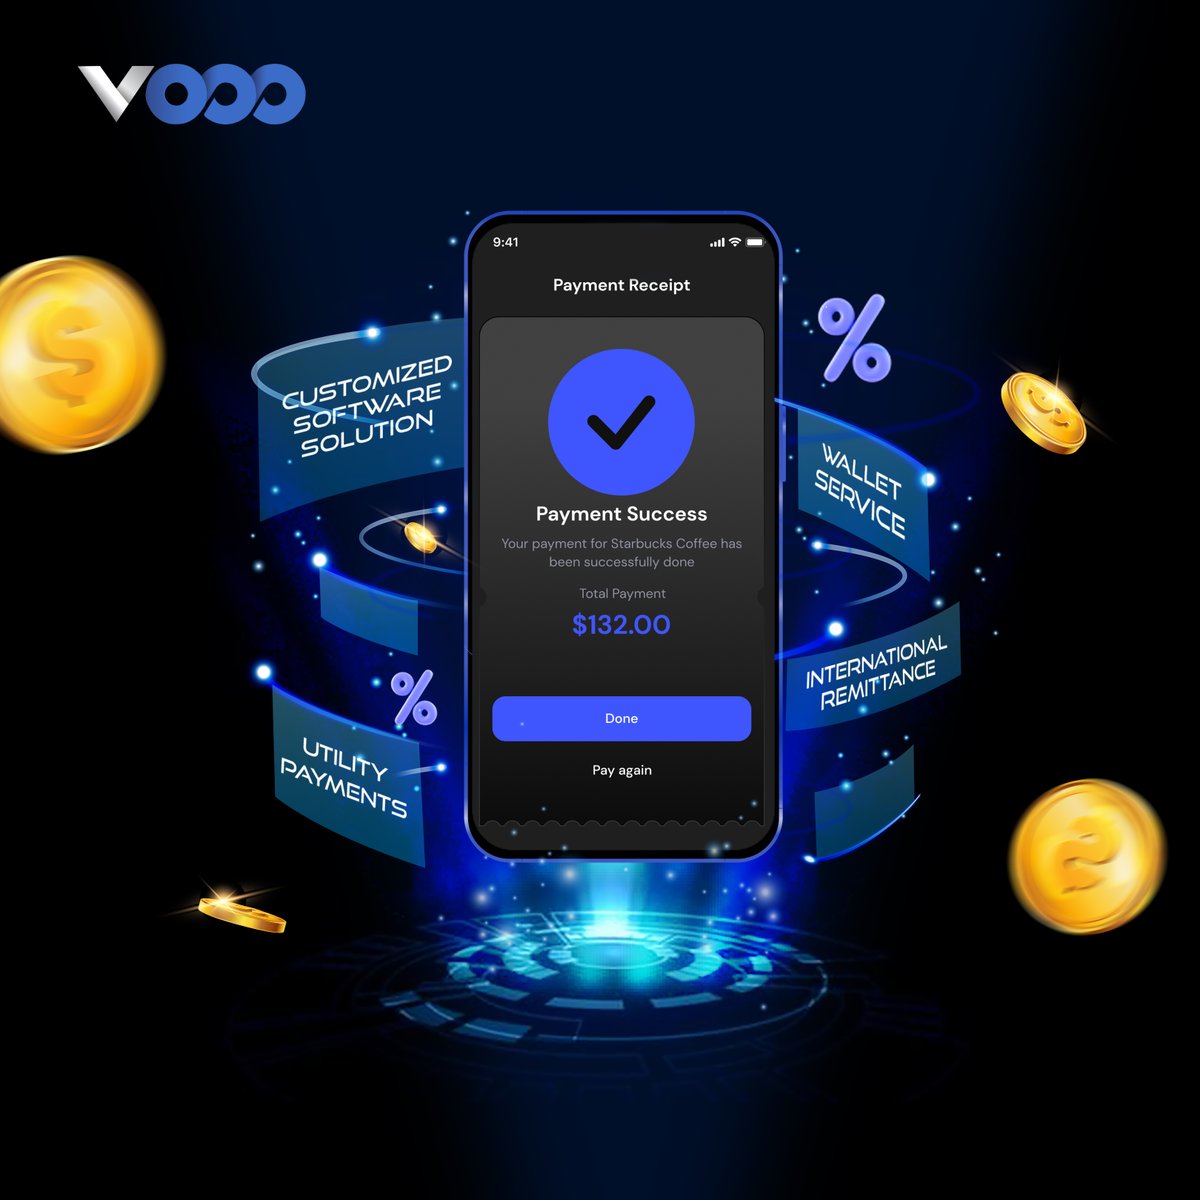 Ready to revolutionize the way you pay?
Introducing Vooo: your passport to seamless payments! It's time to experience seamless payments like never before. Say goodbye to hassle and hello to convenience!
.
.
.
#vooo #moneytransfers #payments #finance #revolution #financialservices